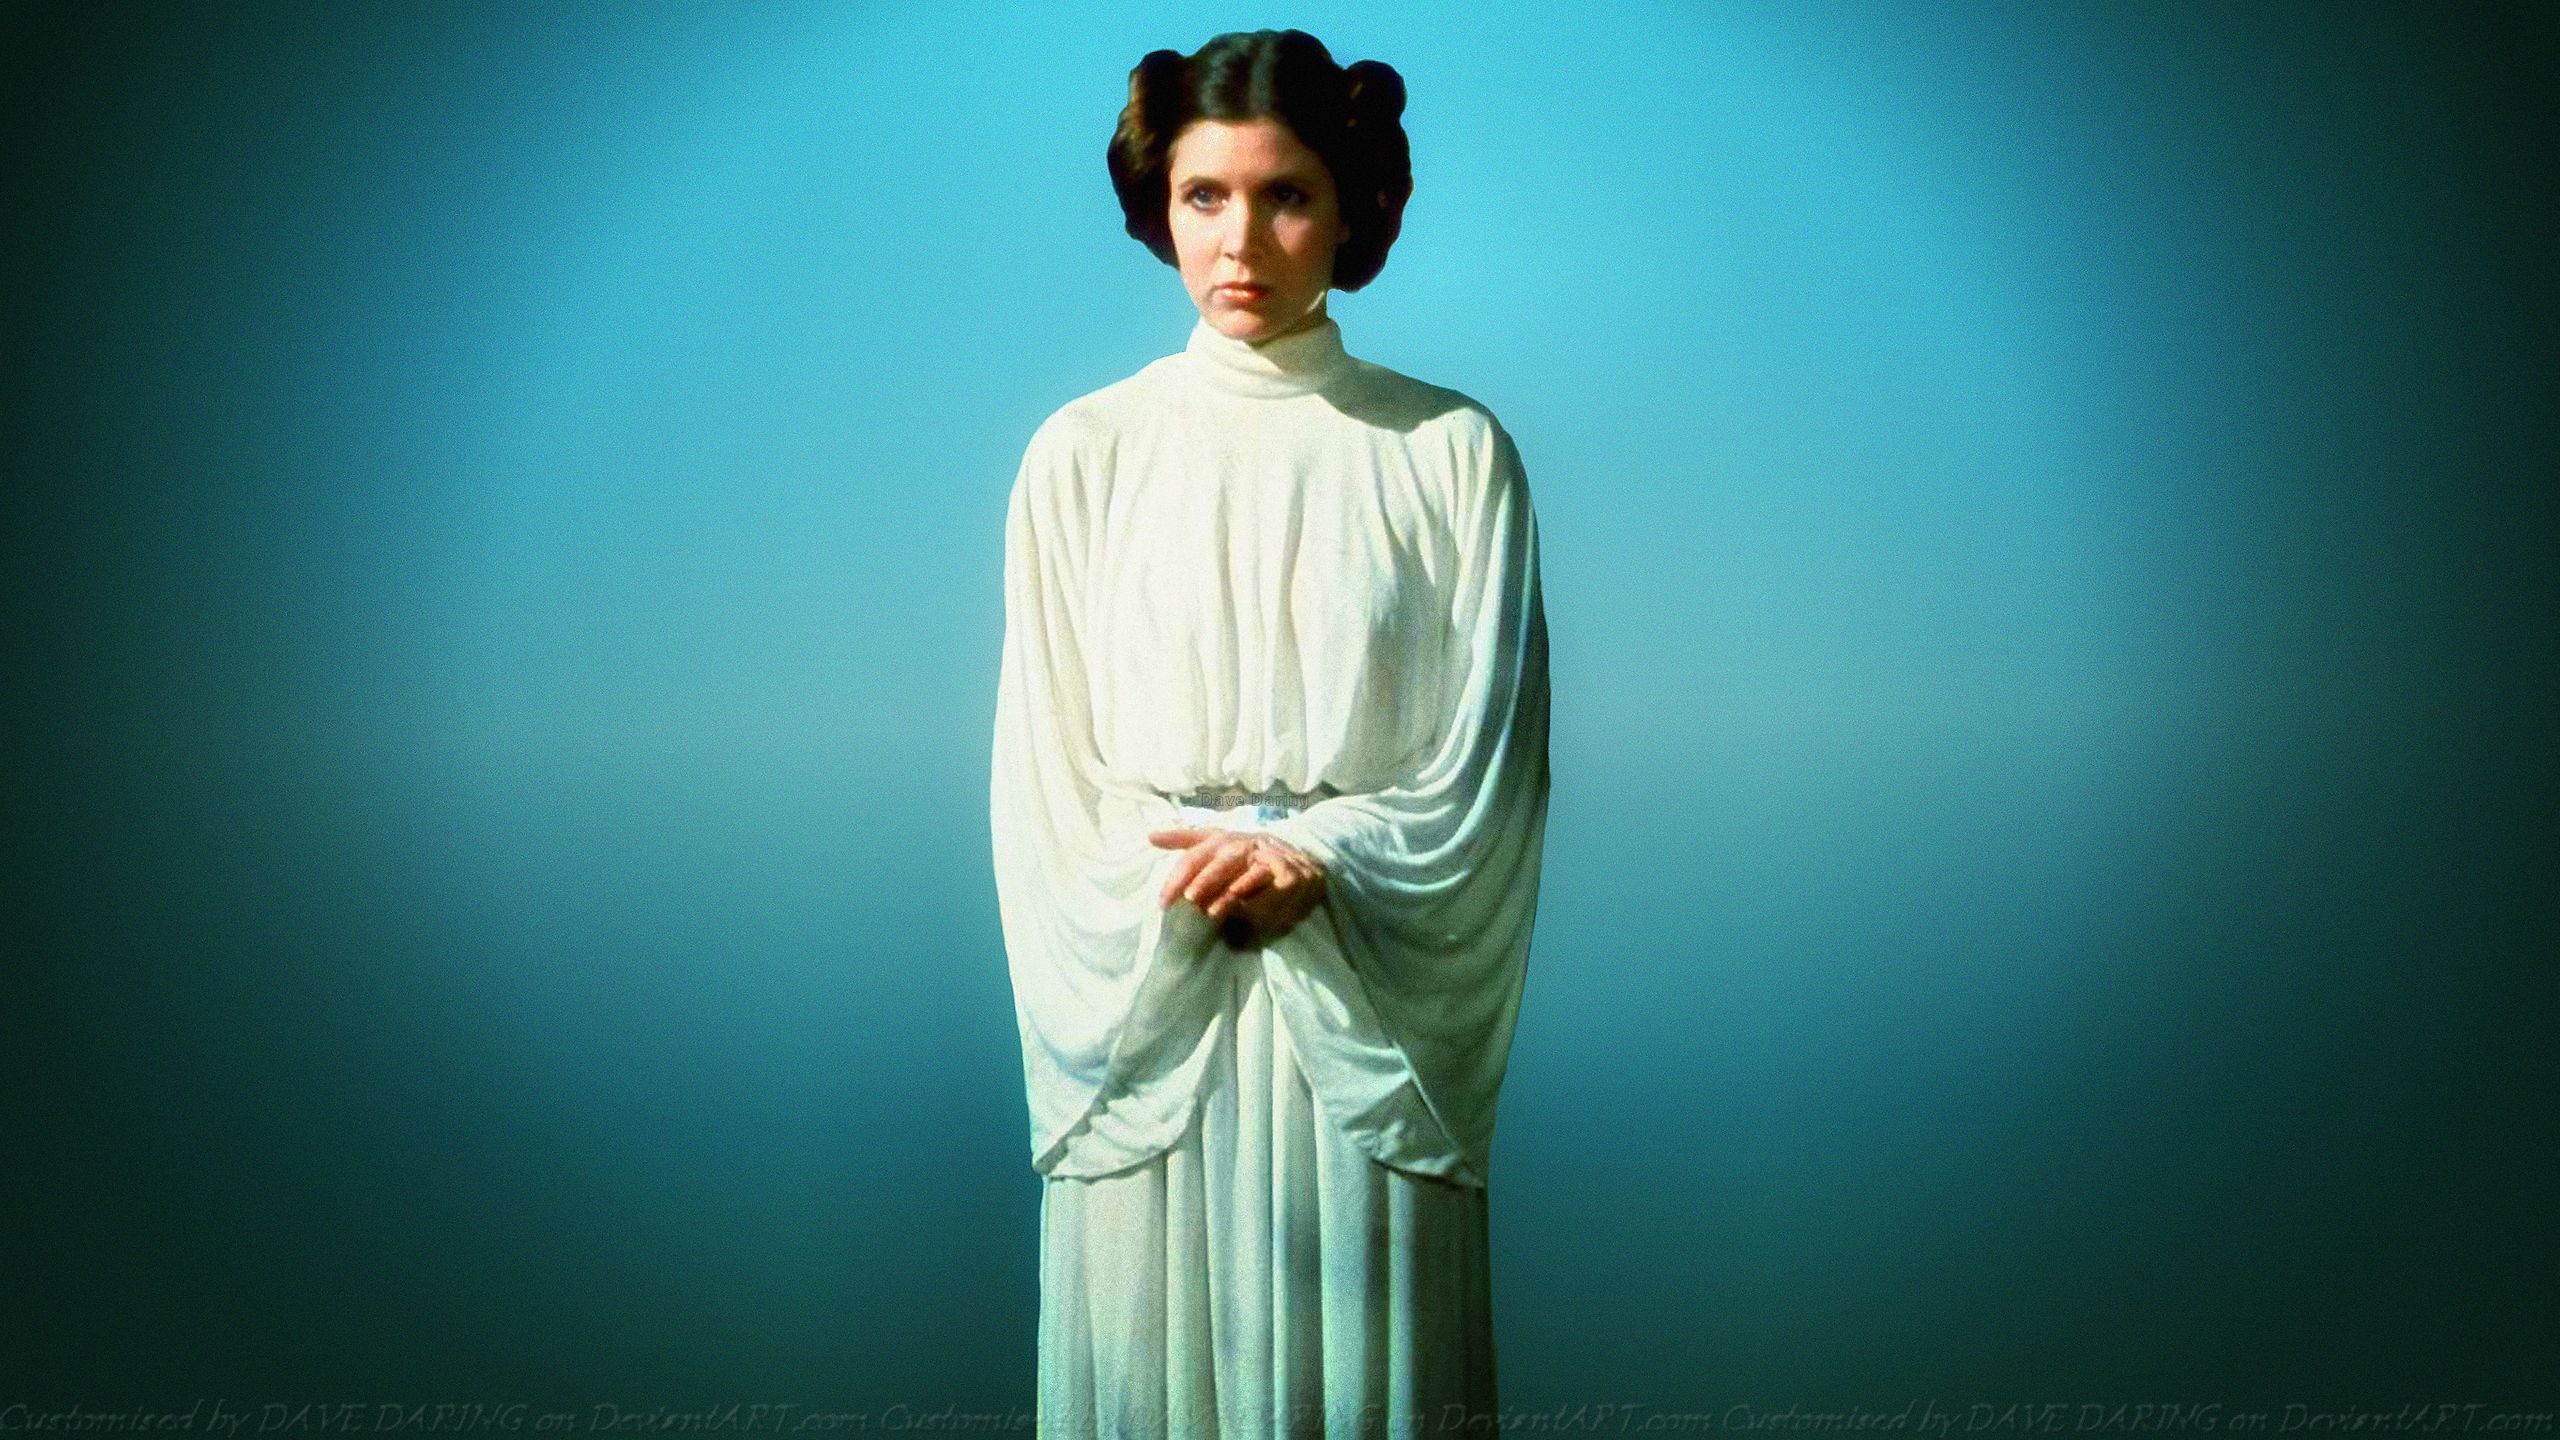 Carrie Fisher Princess Leia XXXII by Dave-Daring on DeviantArt